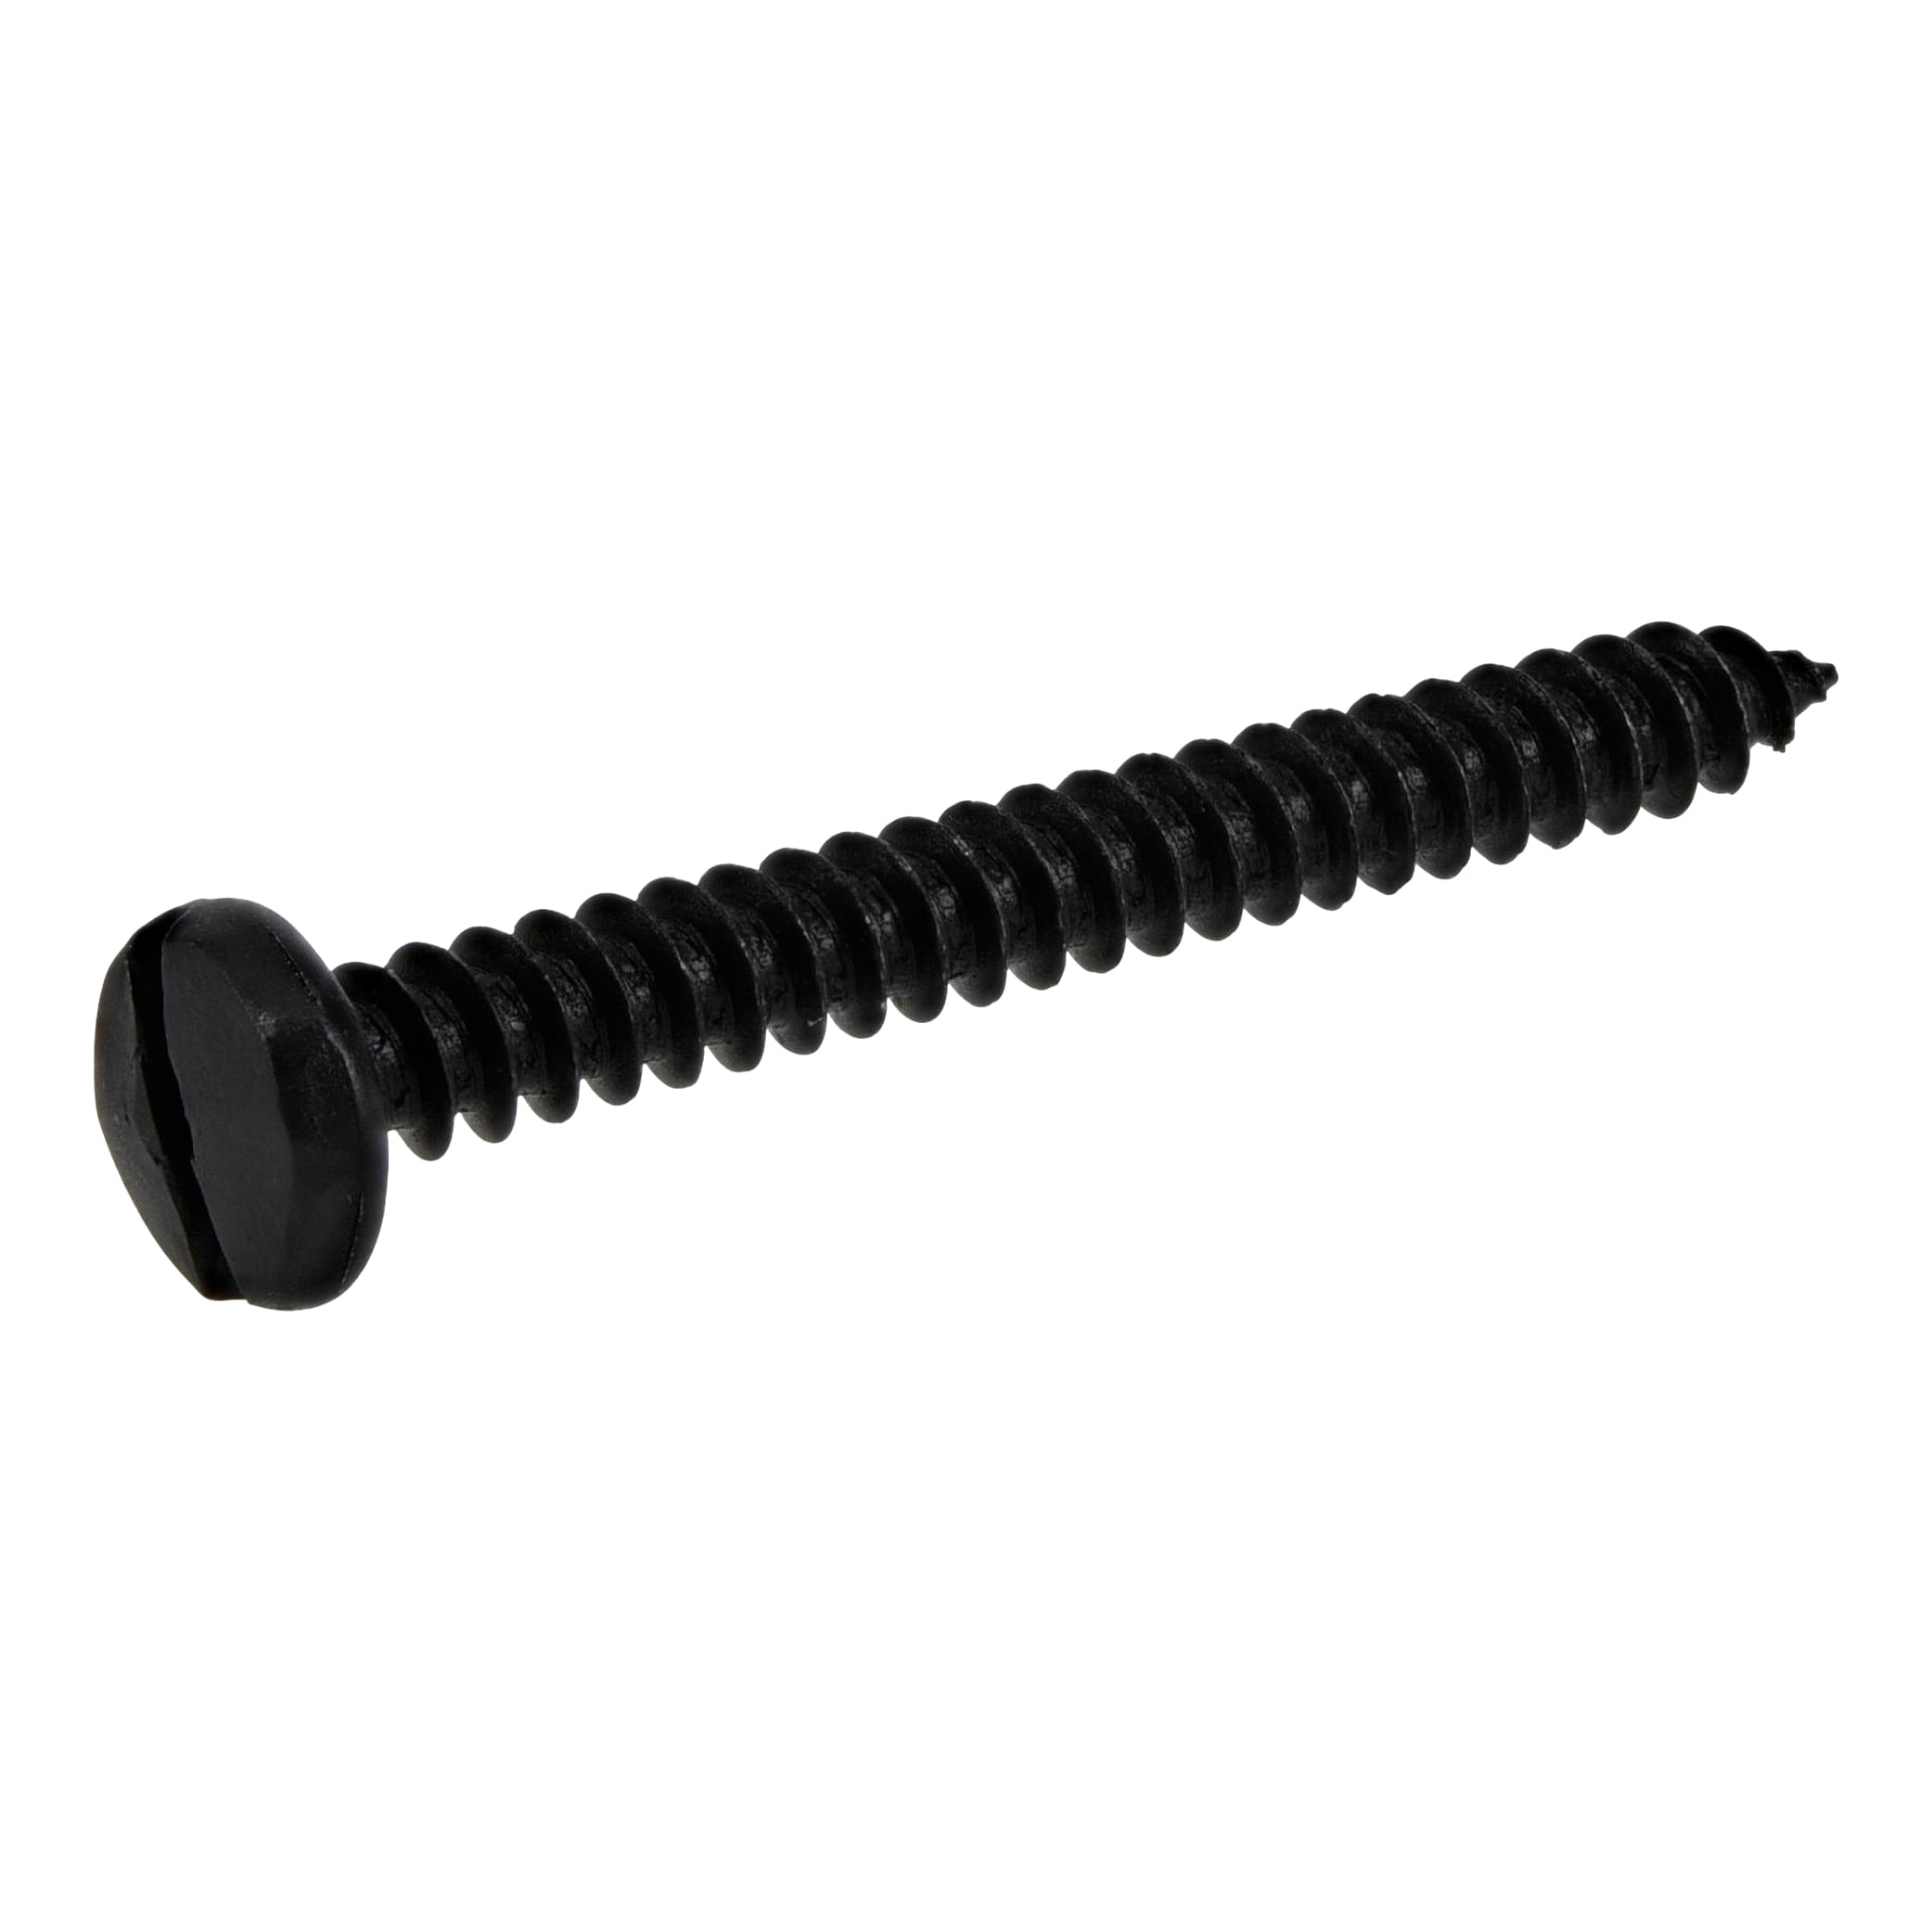 8 x 1 1/2 Deep Thread Wood Screws/Square/Flat Head/Steel/Black Oxide/Type  17 Pt/with Nibs/Type 17 Point/with Nibs / 2/3 Thread (Carton: 100 pcs)  (100): : Industrial & Scientific